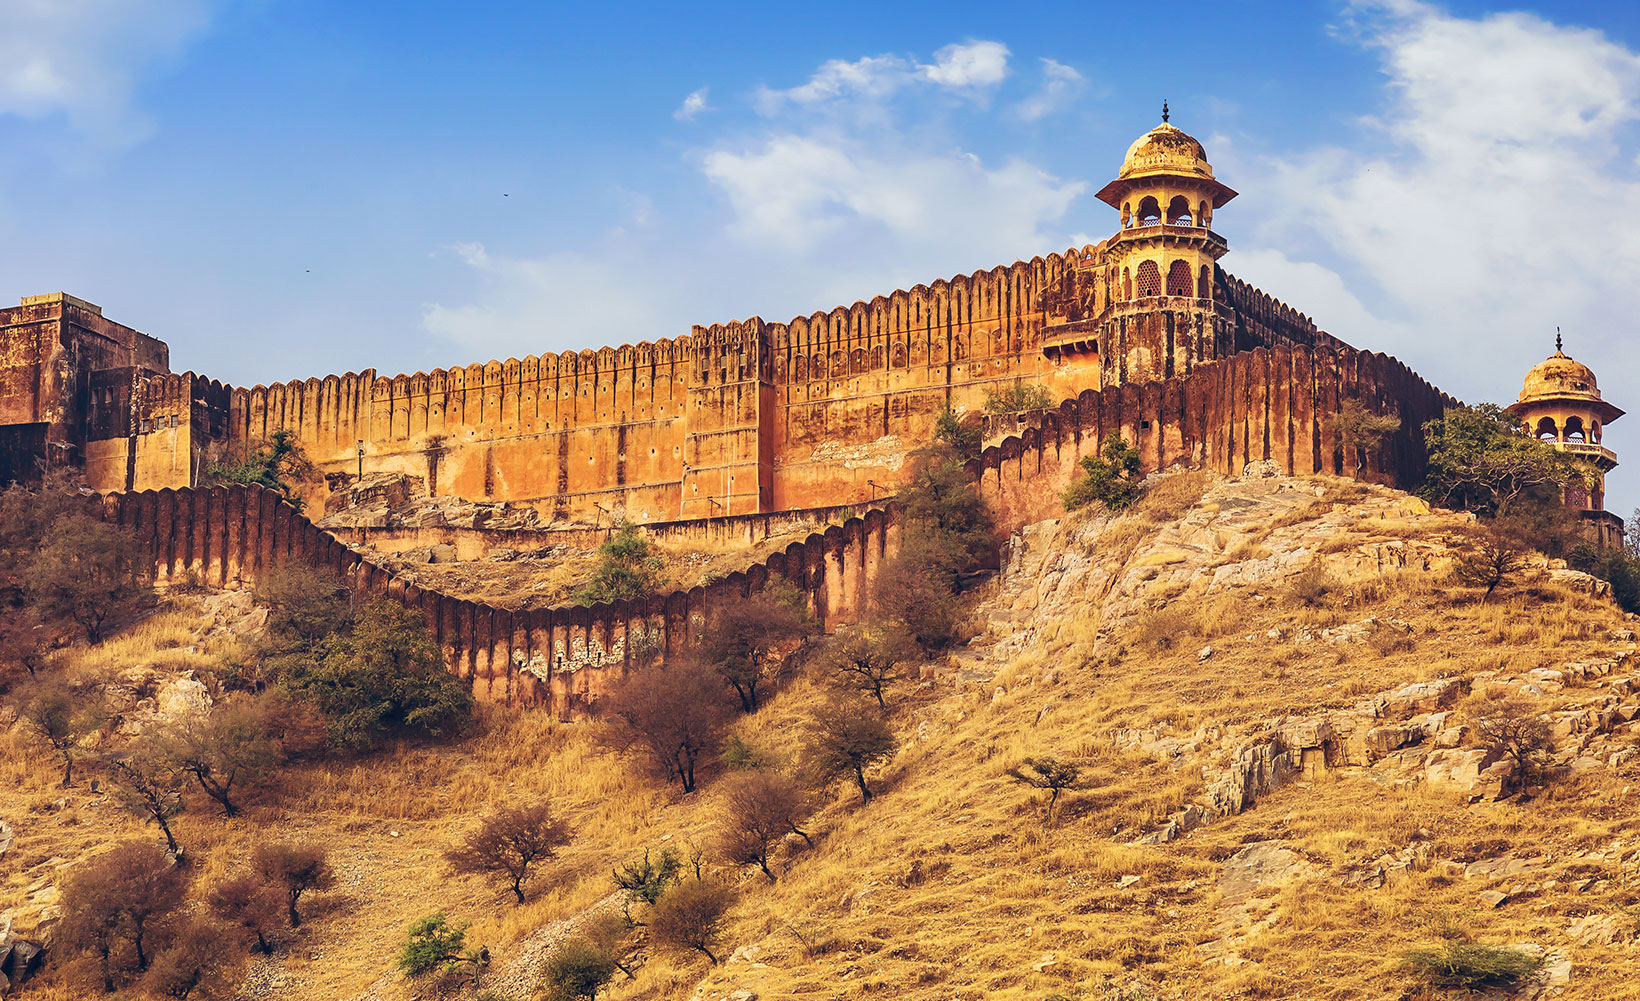 Jaipur certified as World Heritage site by UNESCO